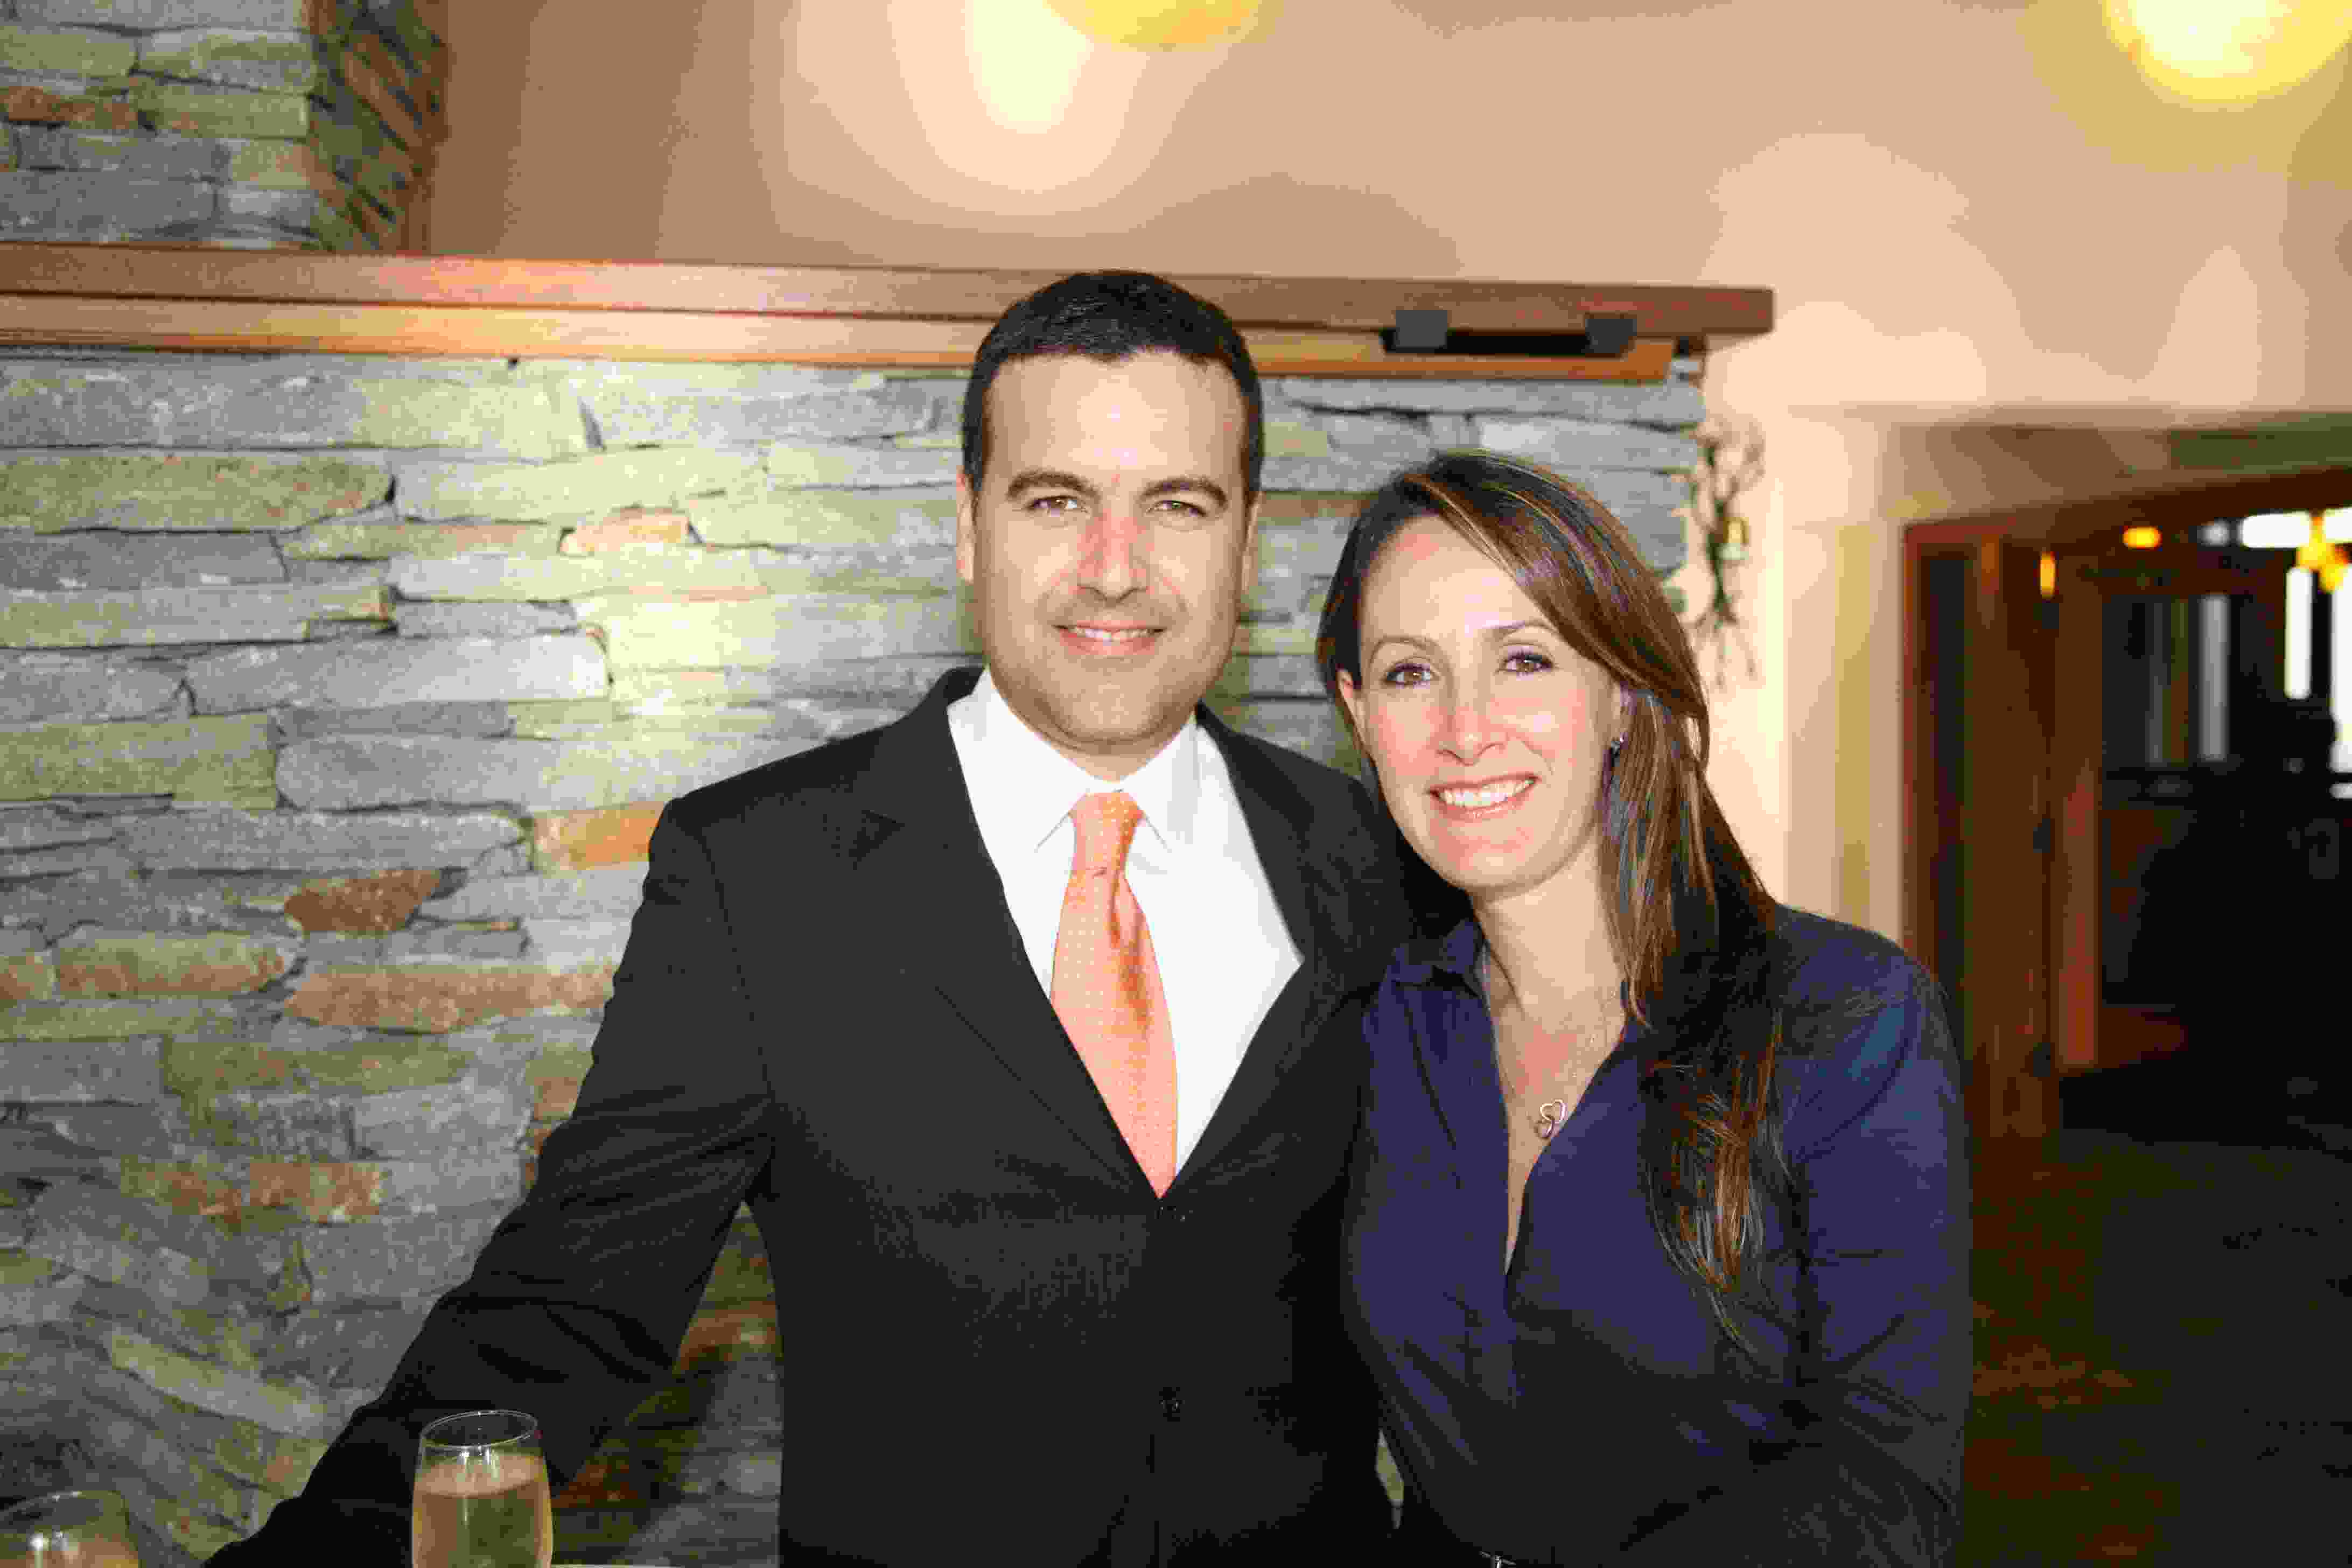 Dr. J. Diego Lozano and wife